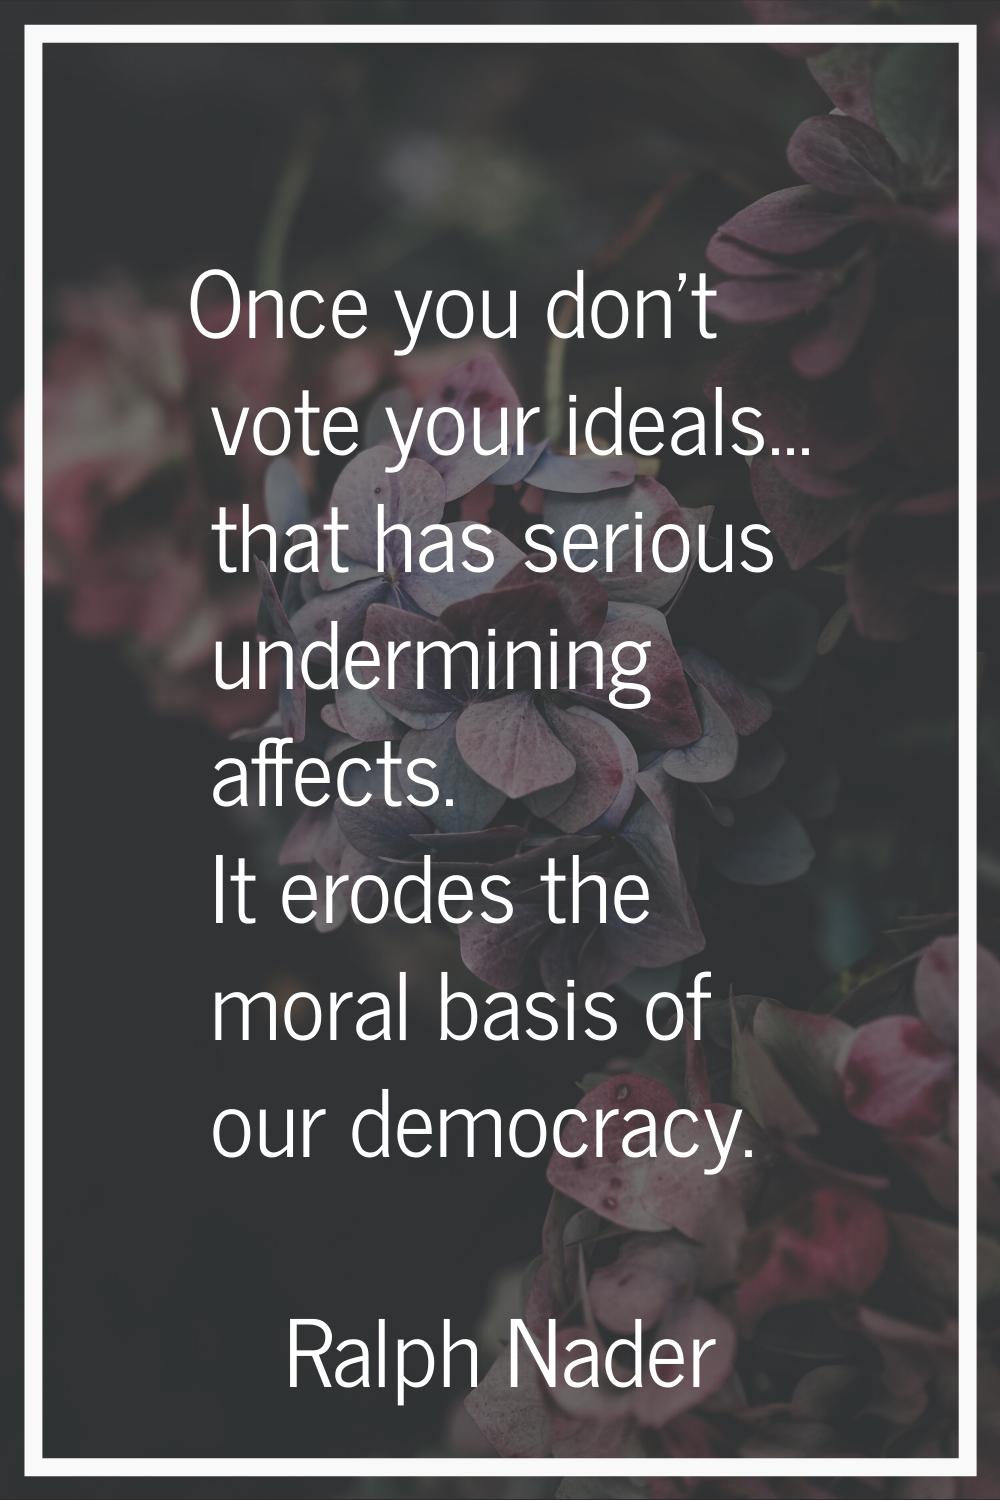 Once you don't vote your ideals... that has serious undermining affects. It erodes the moral basis 